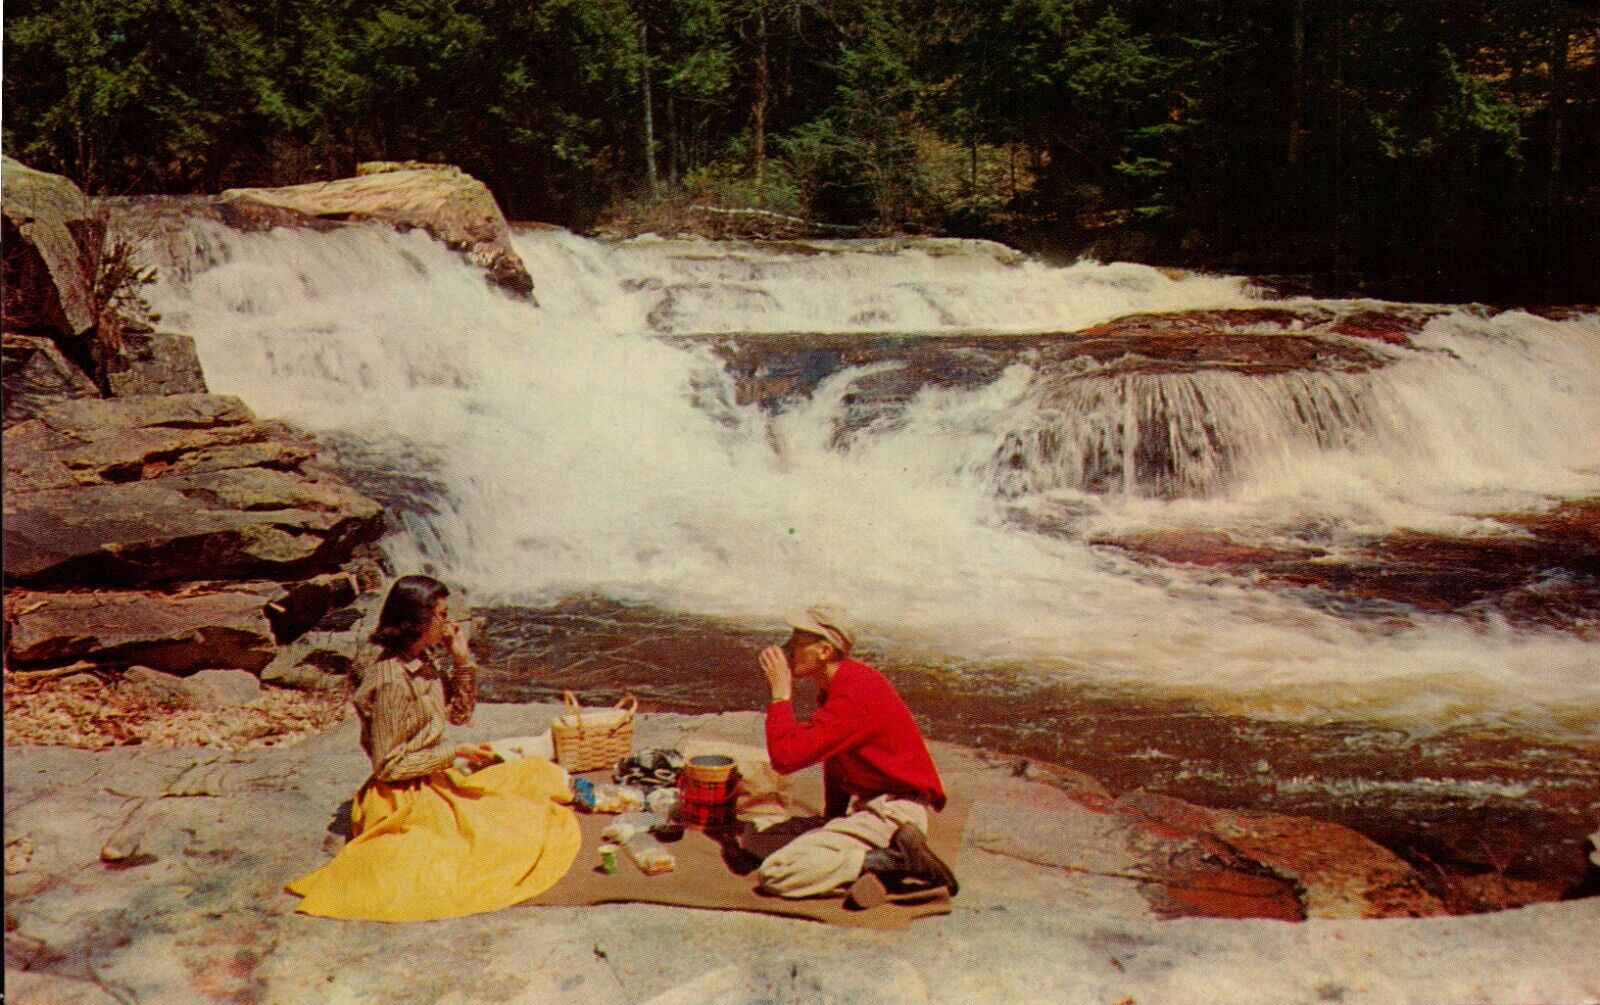 Postcard Picnicking man and woman by rock ledge rushing waters